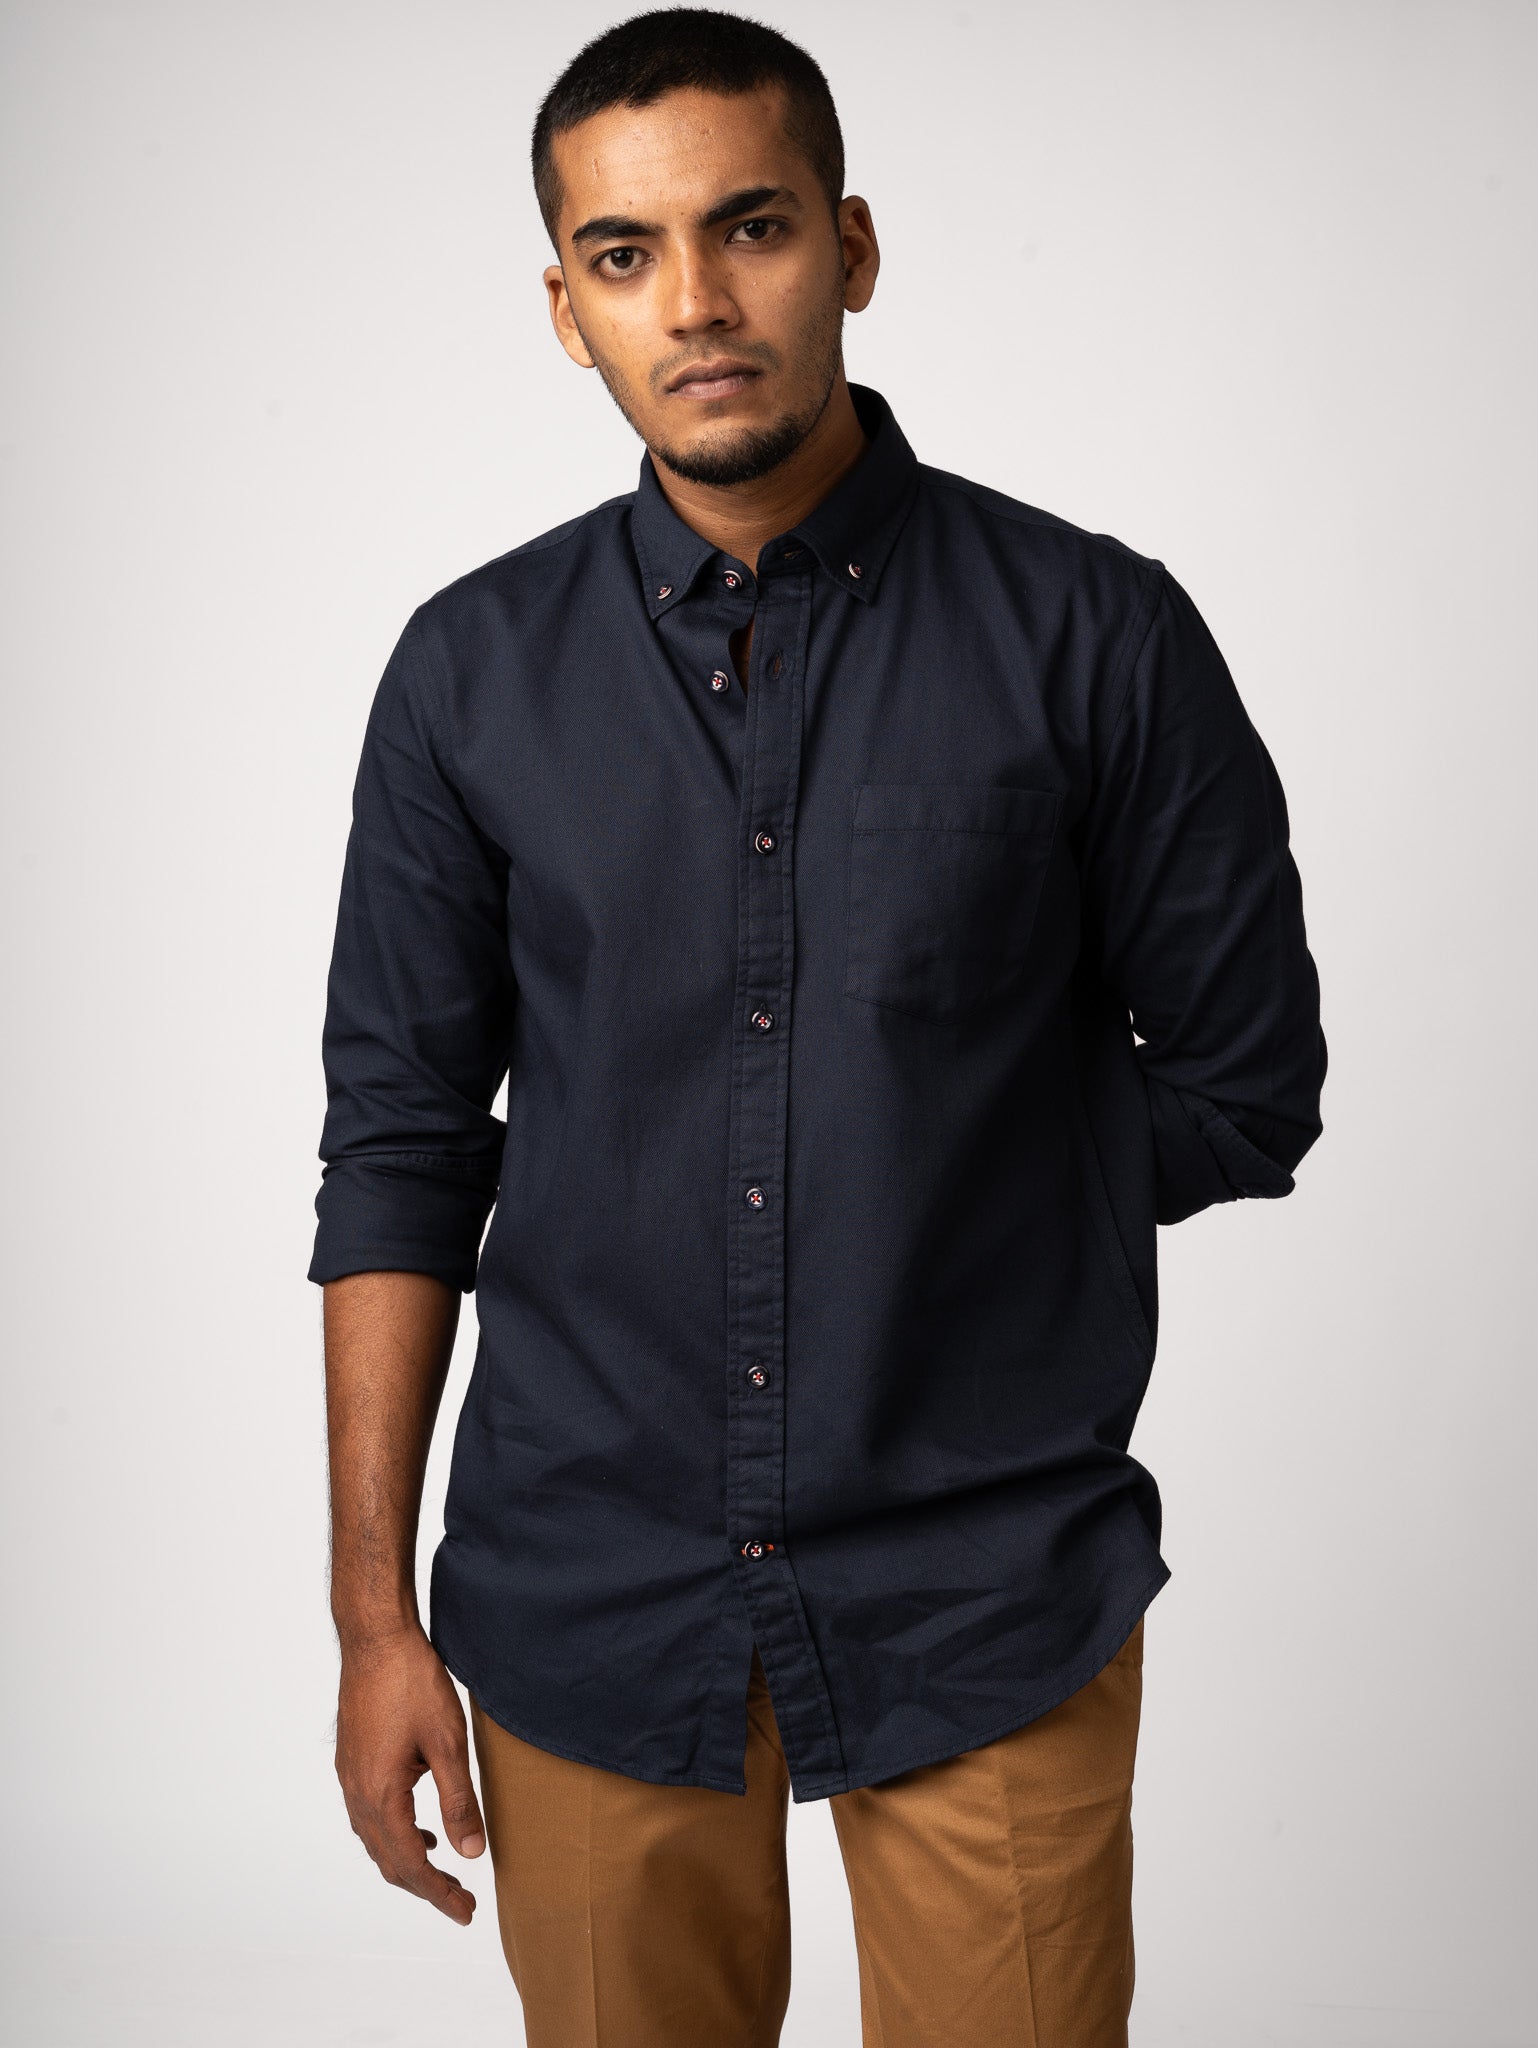 Bare Brown Solid Cotton Oxford Shirt, Slim Fit with Full Sleeves - Navy